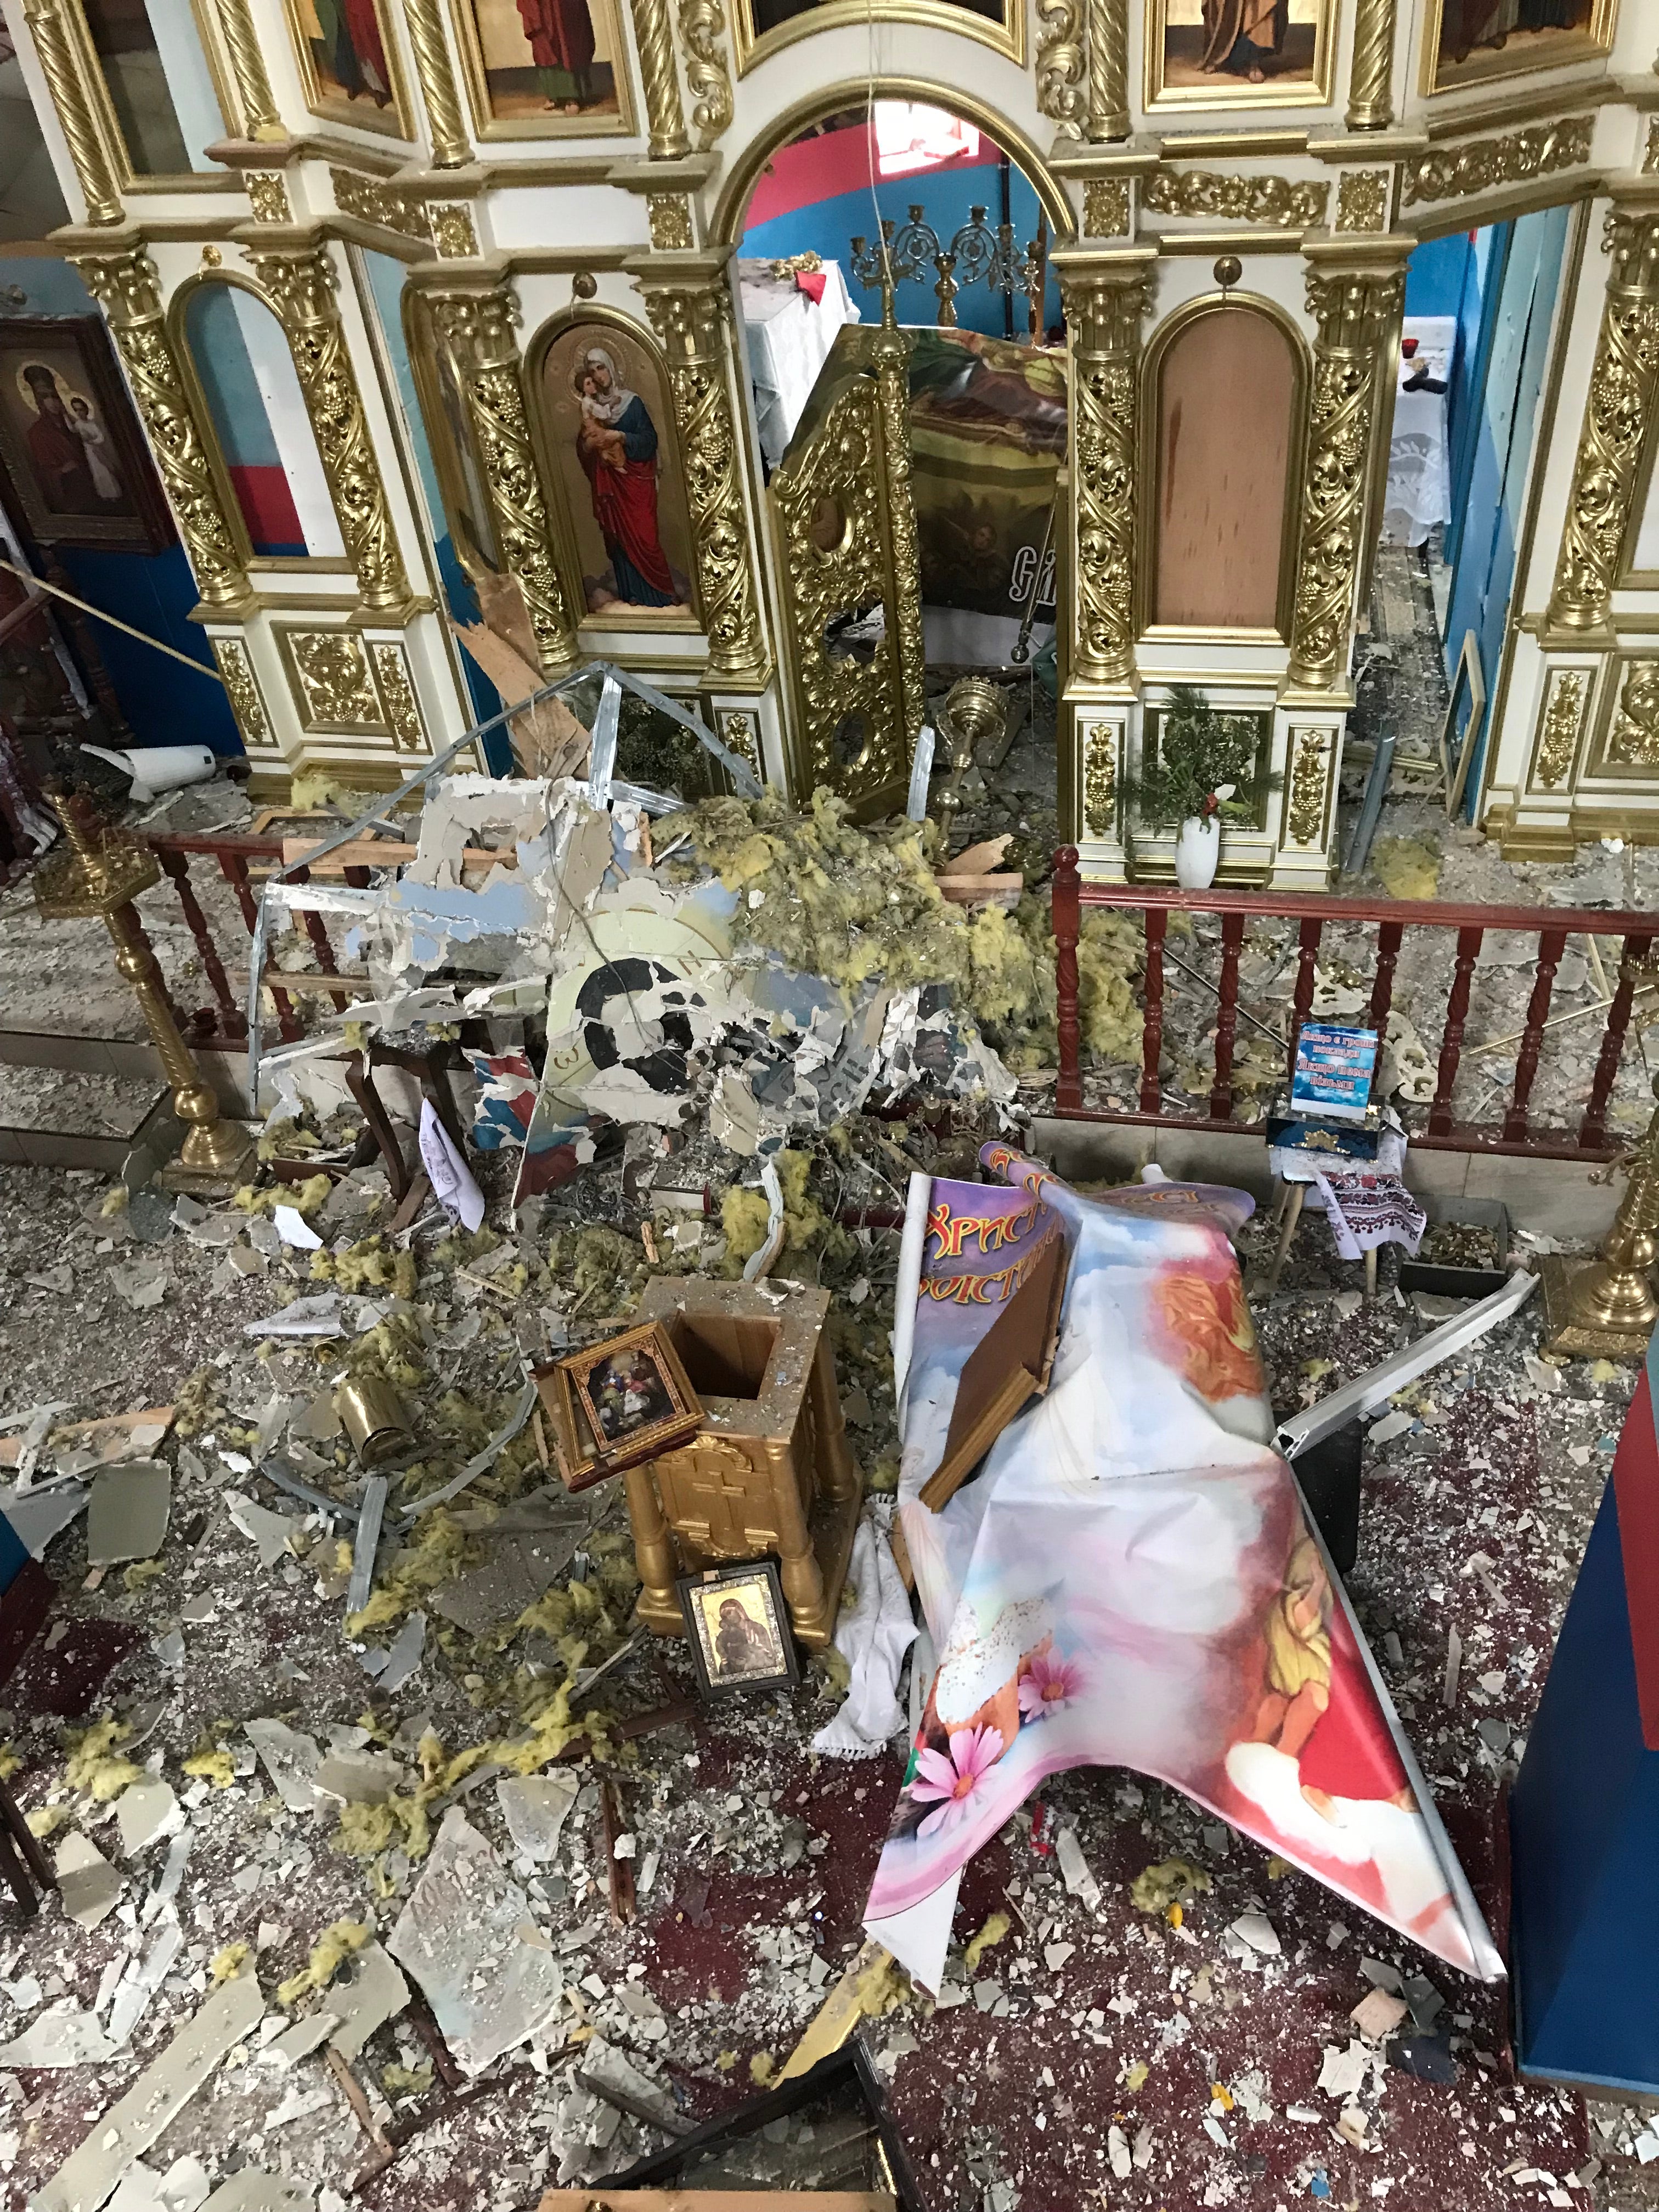 The interior of St Michael’s church after the recent bomb attack